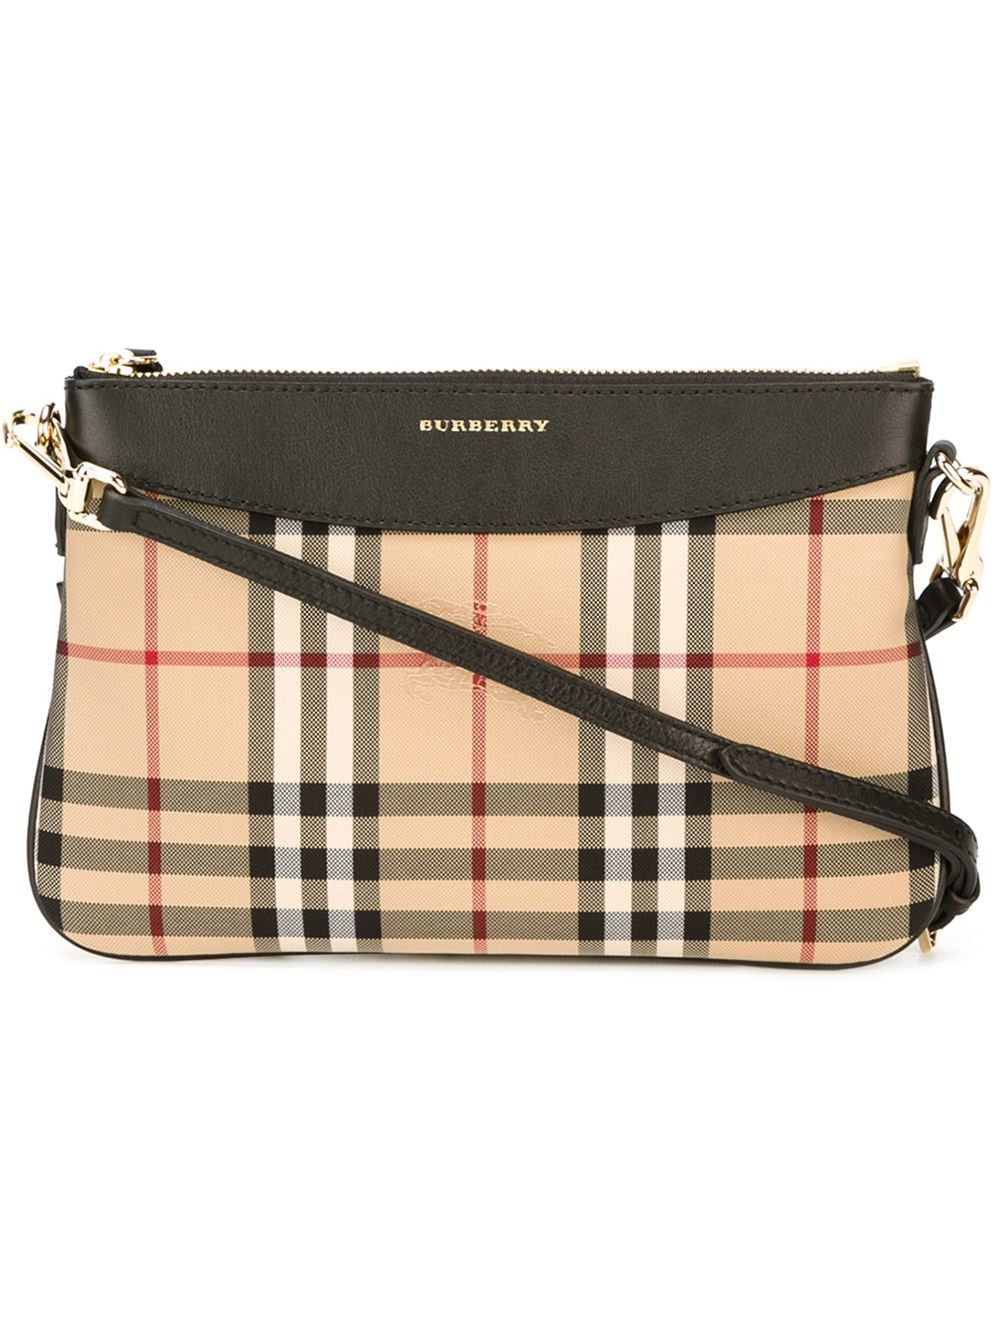 Burberry Horseferry Check Crossbody Bag in Beige (NUDE & NEUTRALS) | Lyst